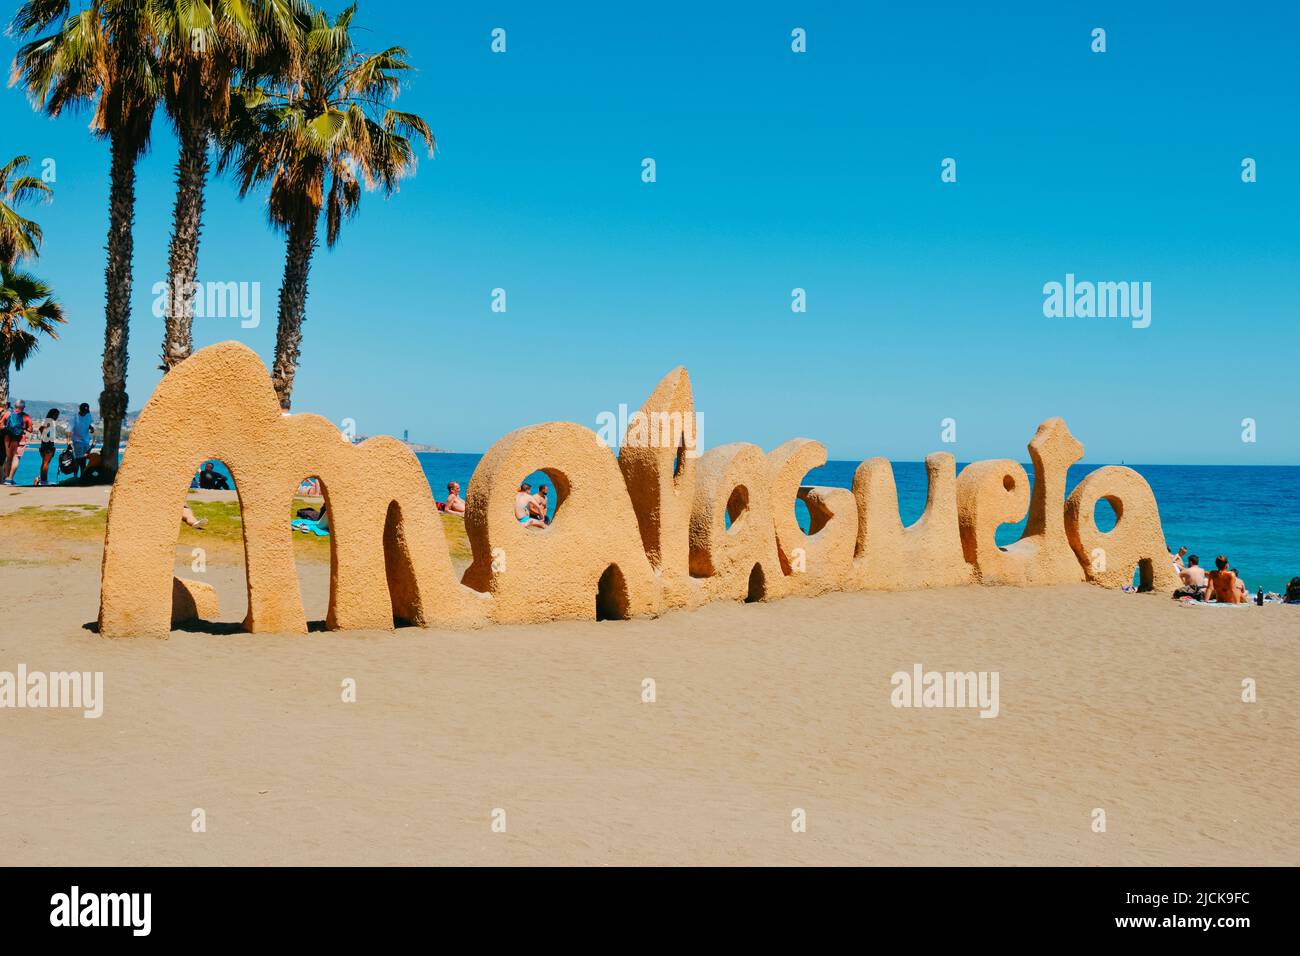 Malaga, Spain - May 26, 2022: A view of the popular Malagueta sign at La Malagueta beach in Malaga, Spain, in a sunny spring day Stock Photo